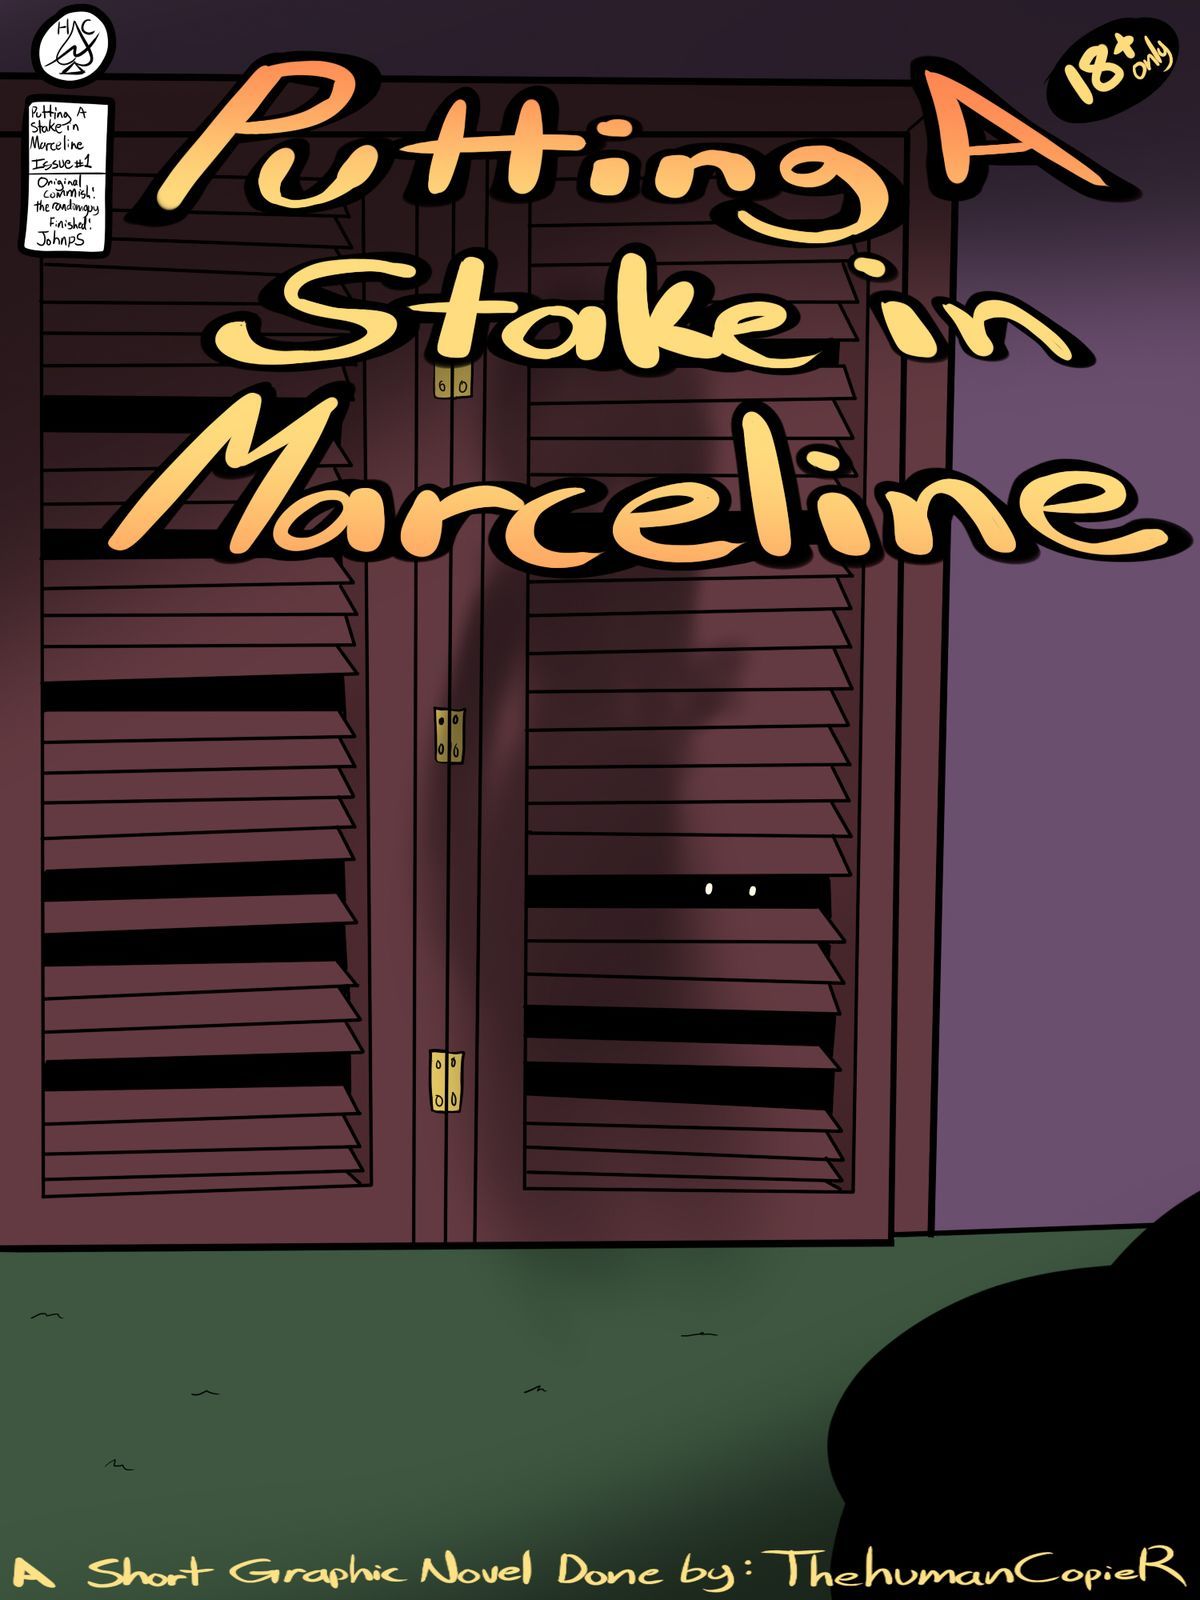 Adventure_Time_-_Putting_A_Stake_in_Marceline comix.jpg